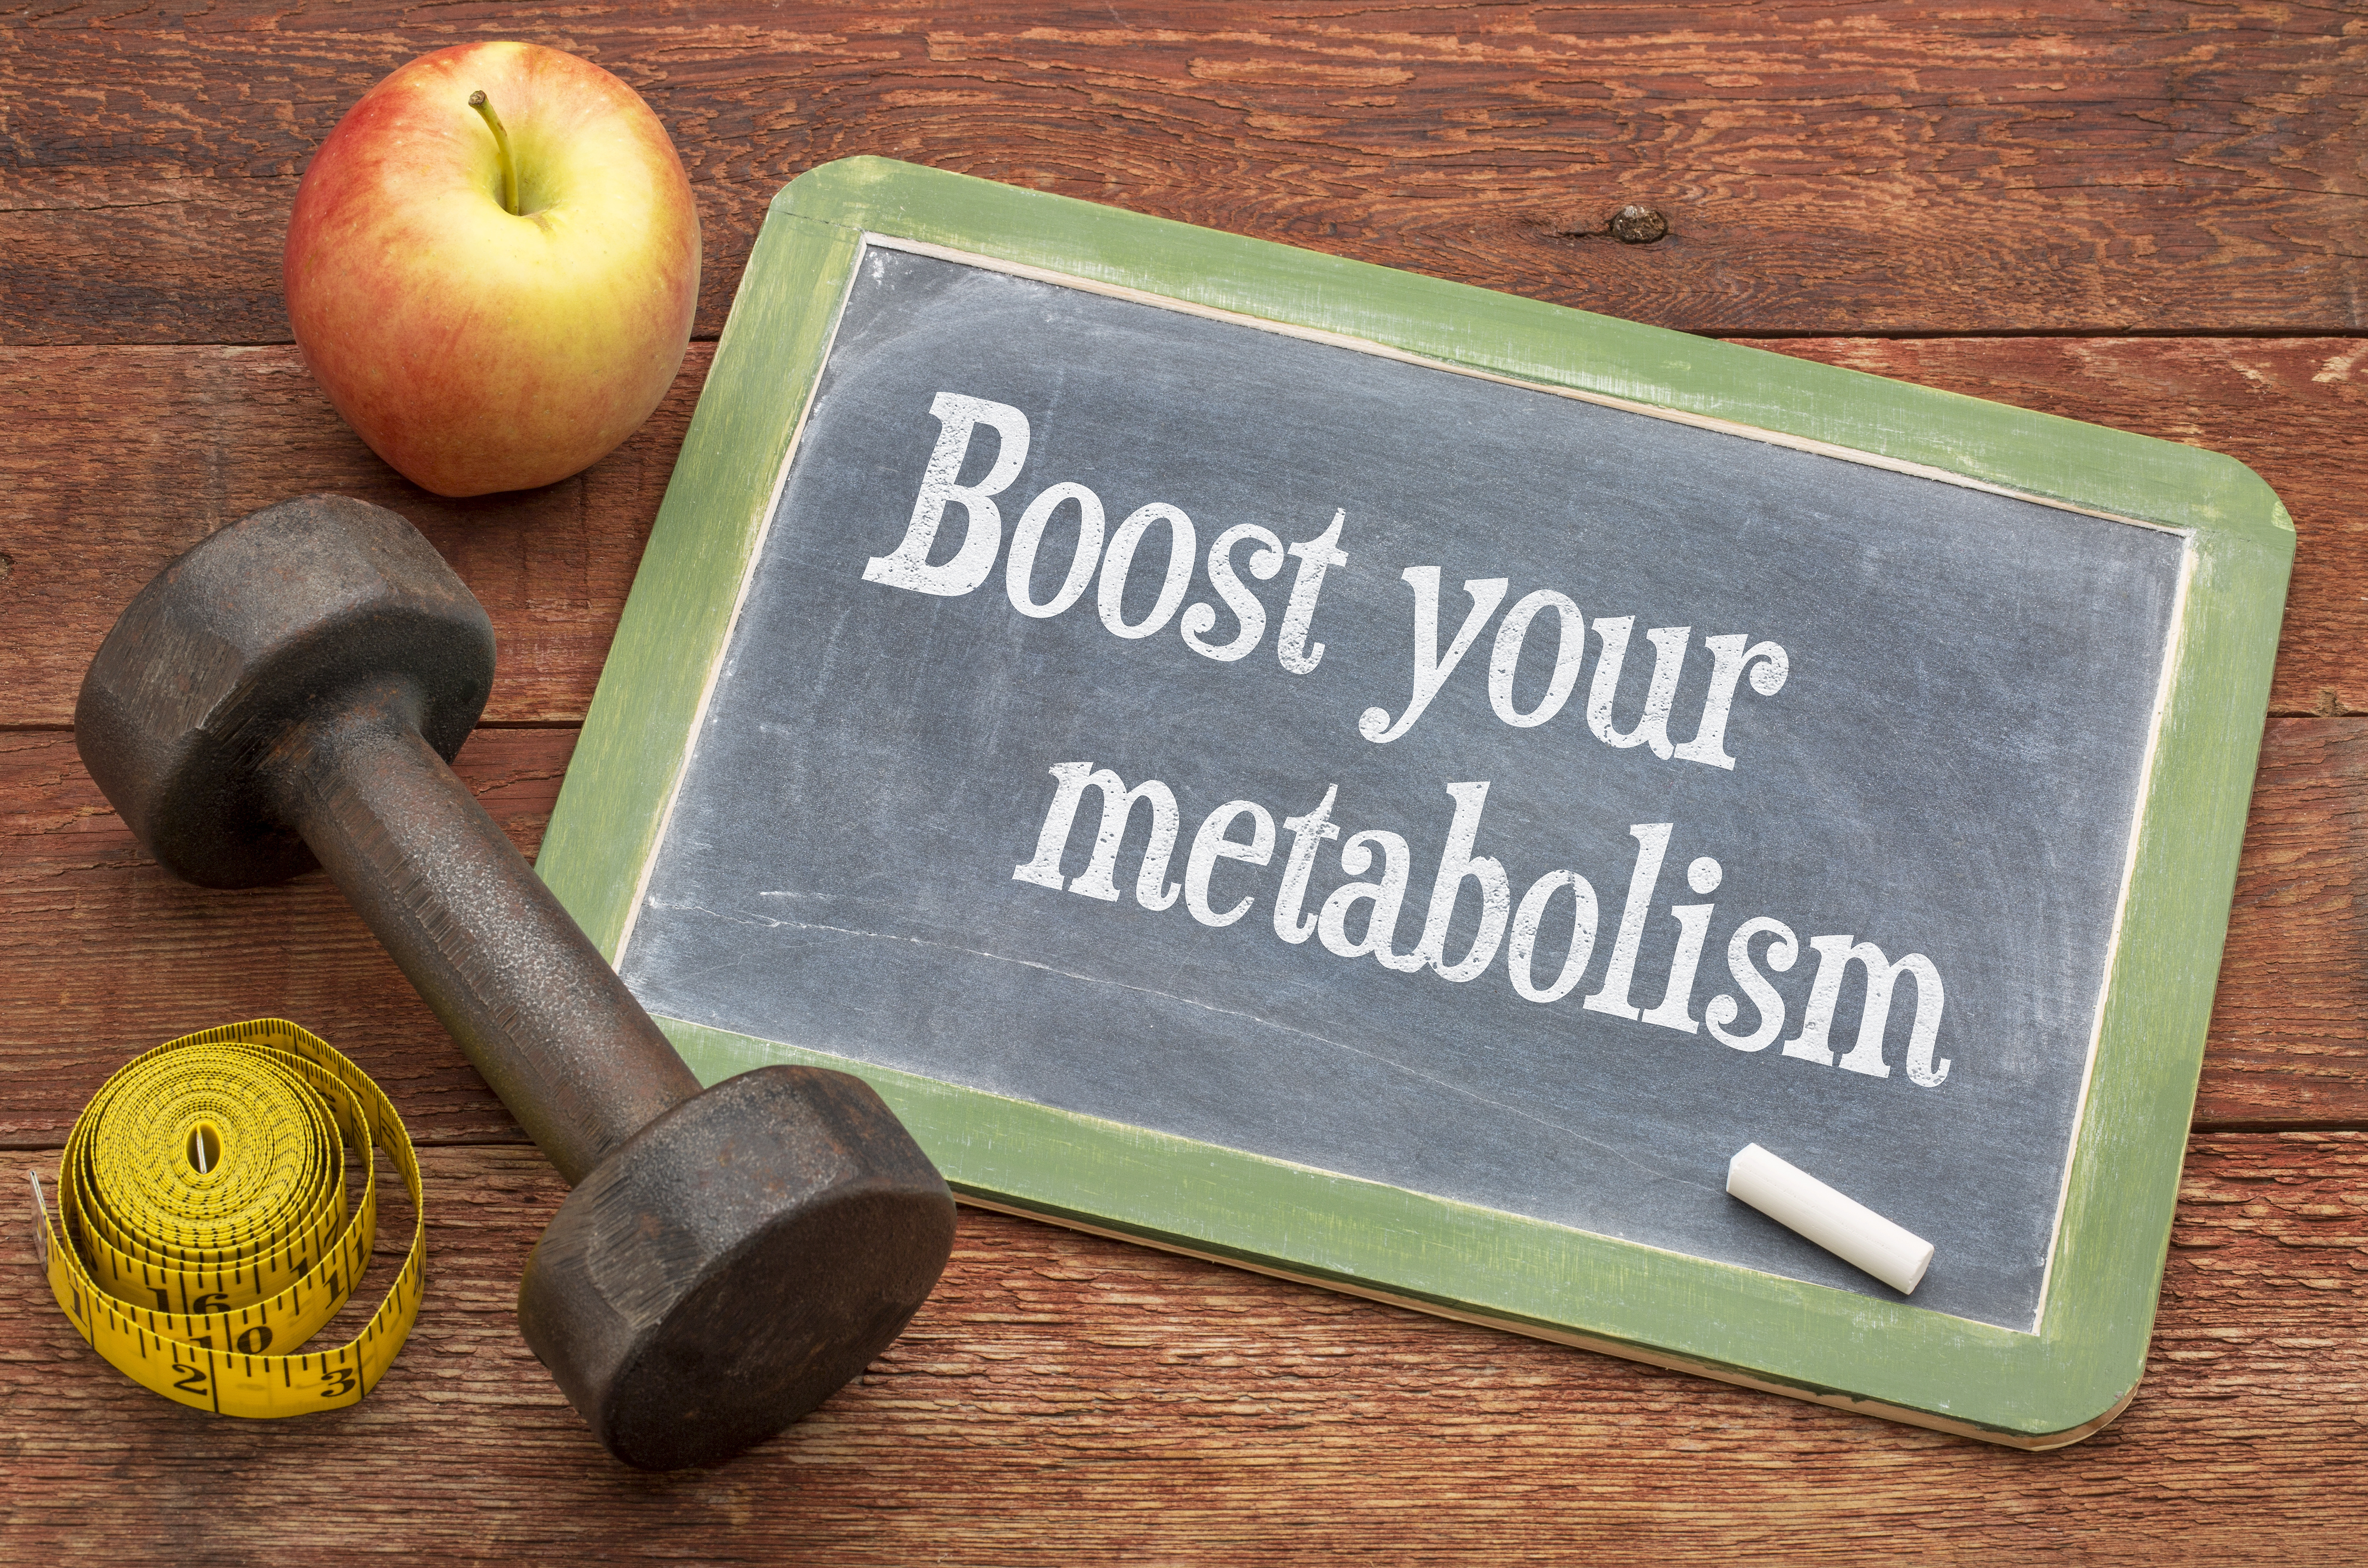 Boost your Metabolism with Exercise!